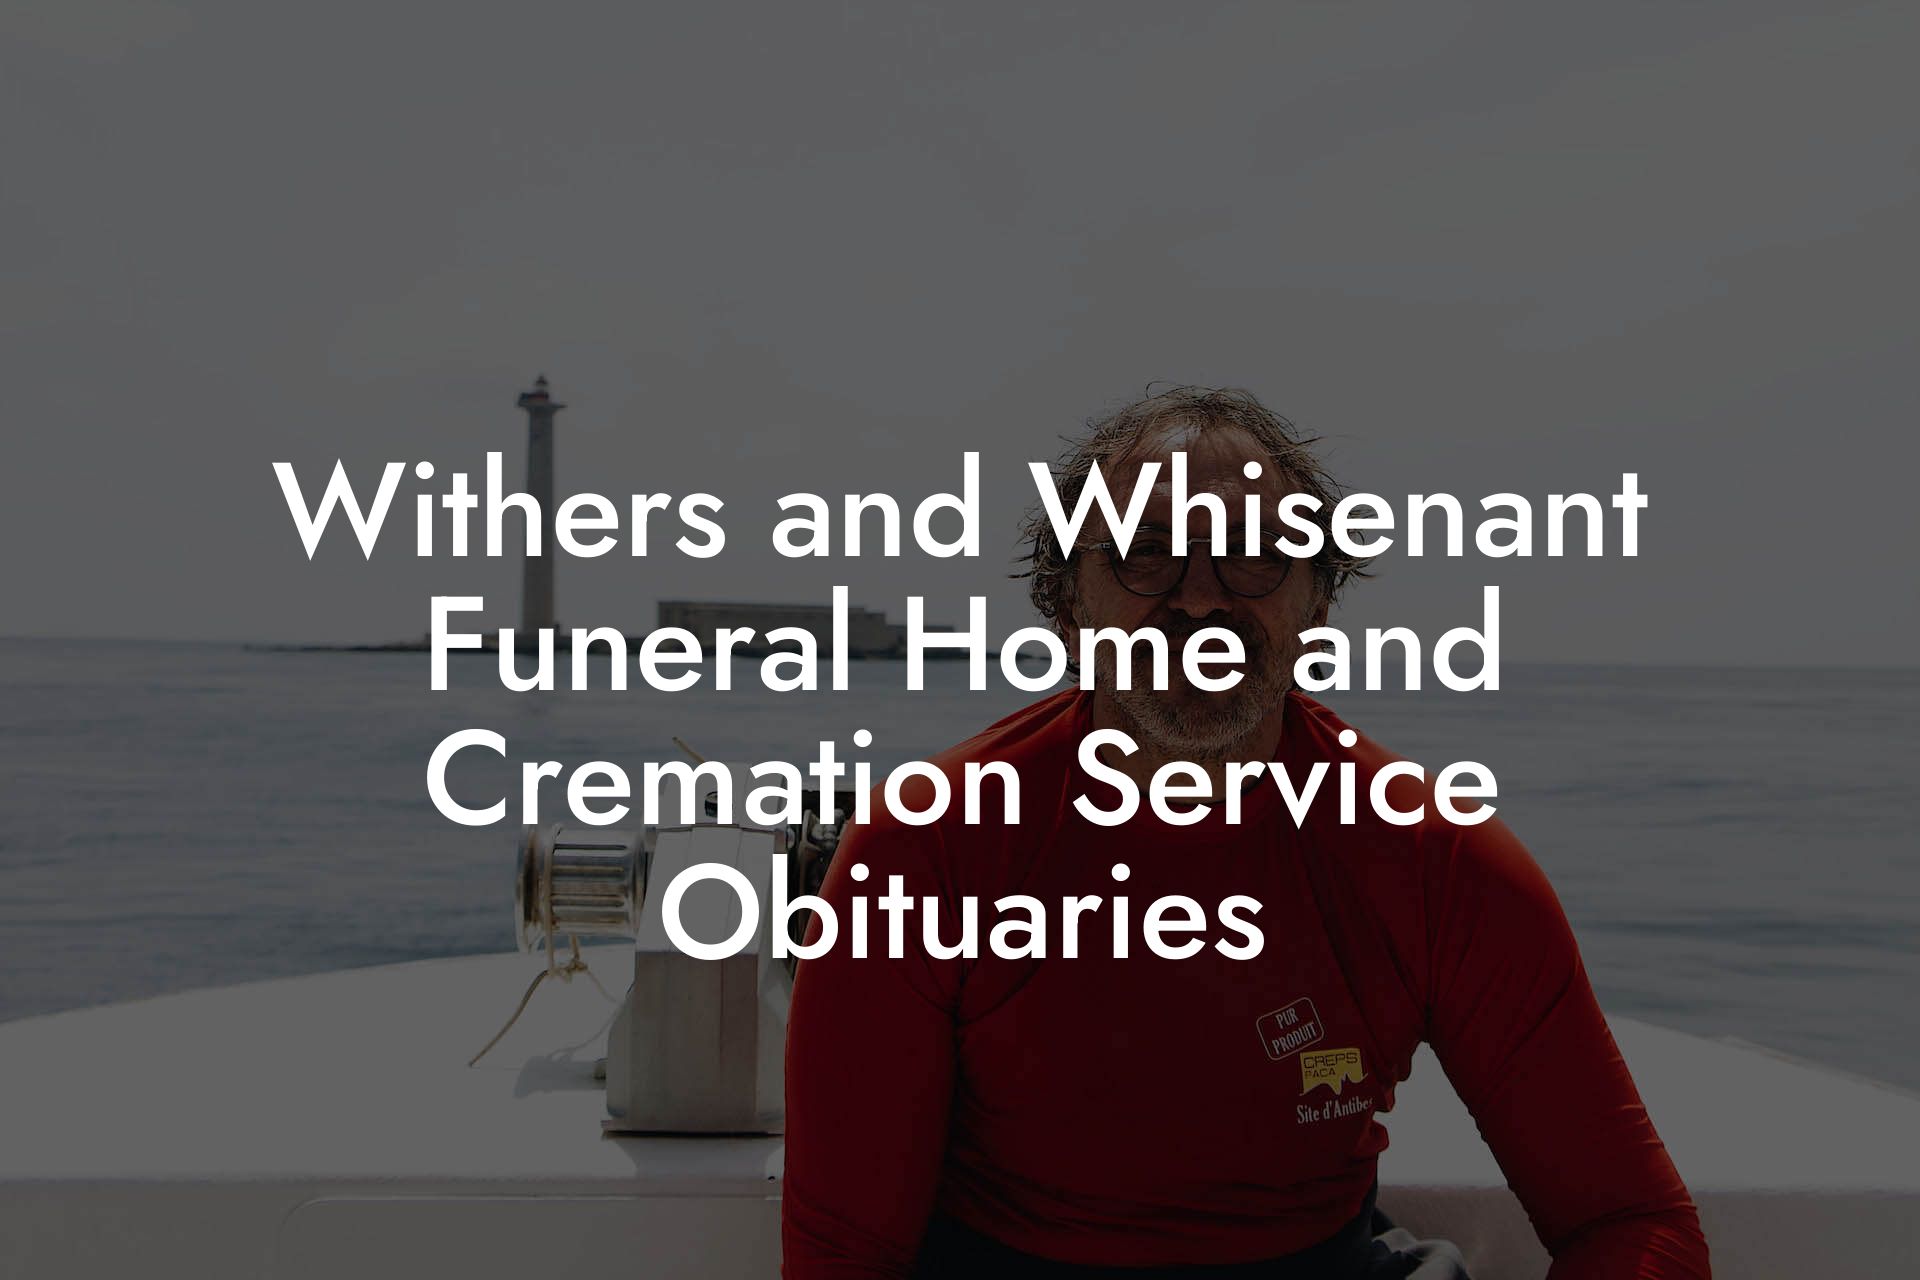 Withers and Whisenant Funeral Home and Cremation Service Obituaries